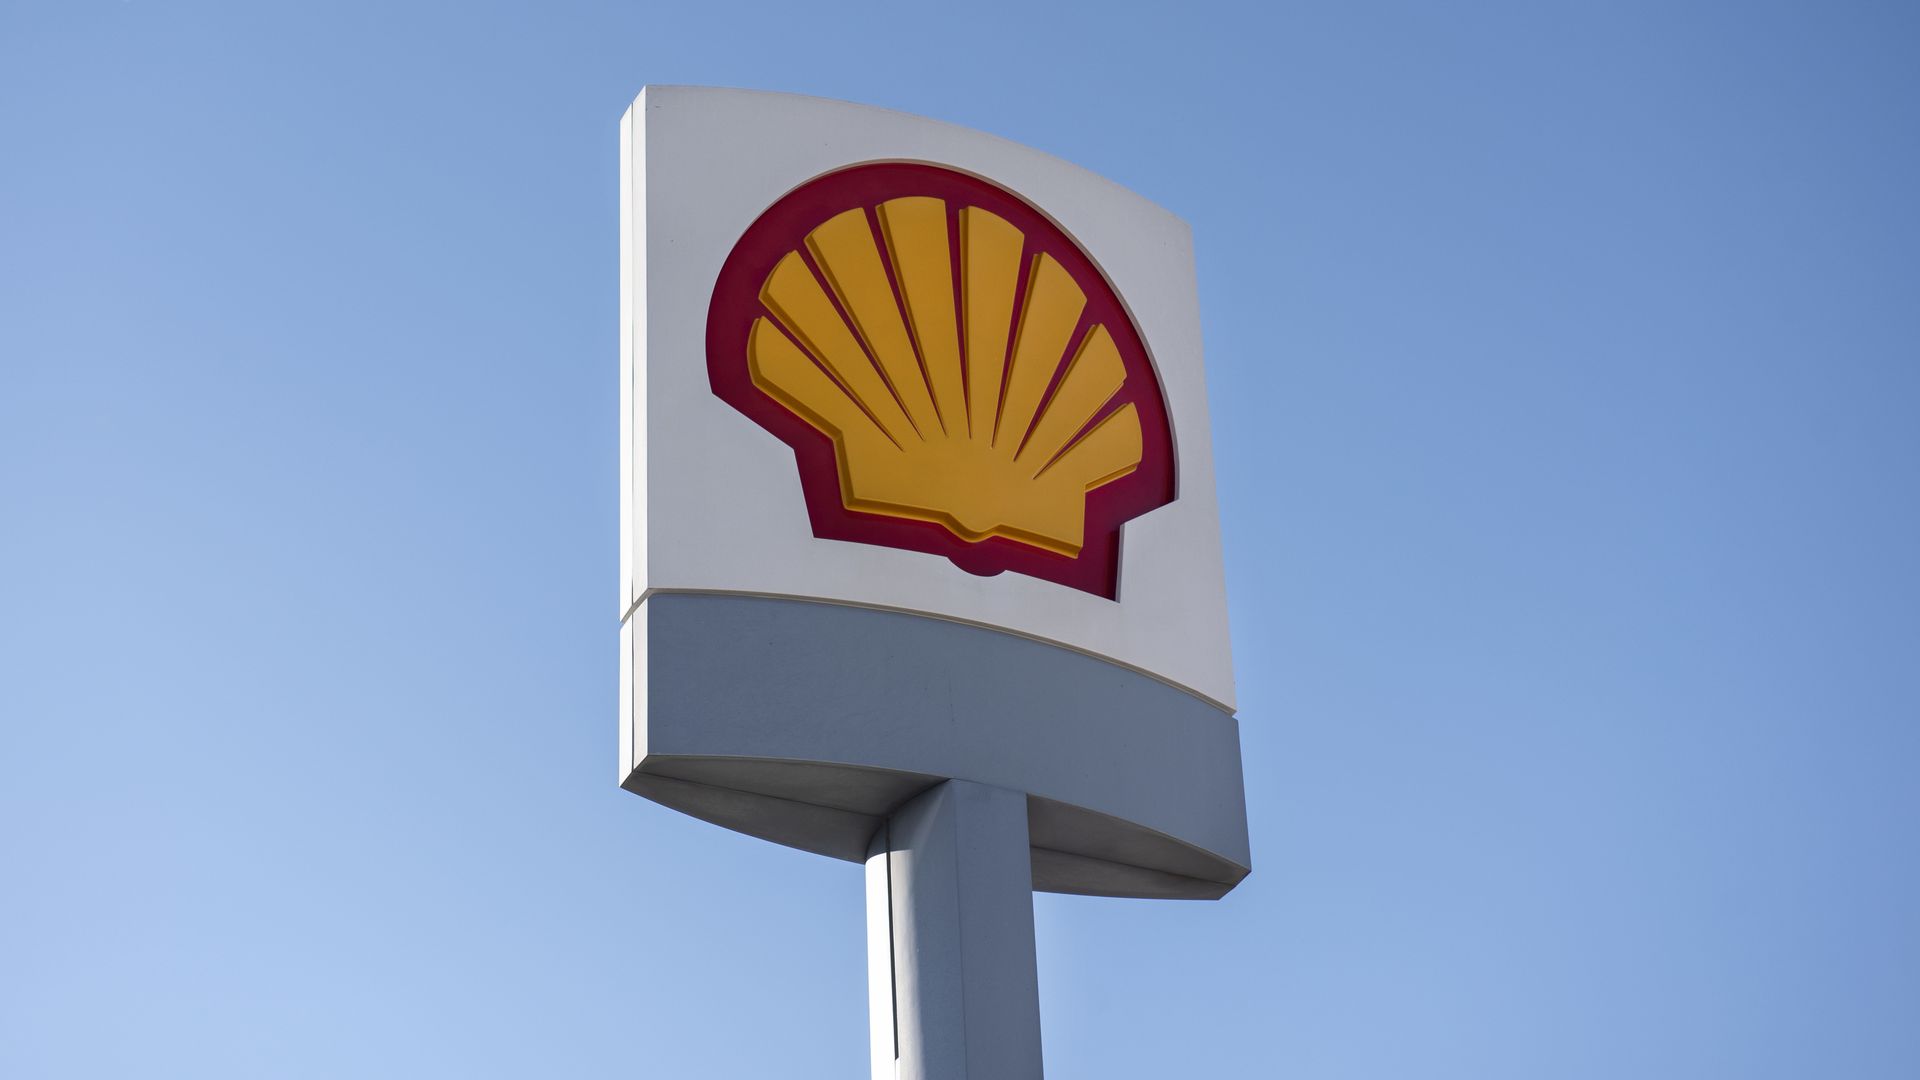 Shell says it's leaving a lobbying group after a climate policy split.